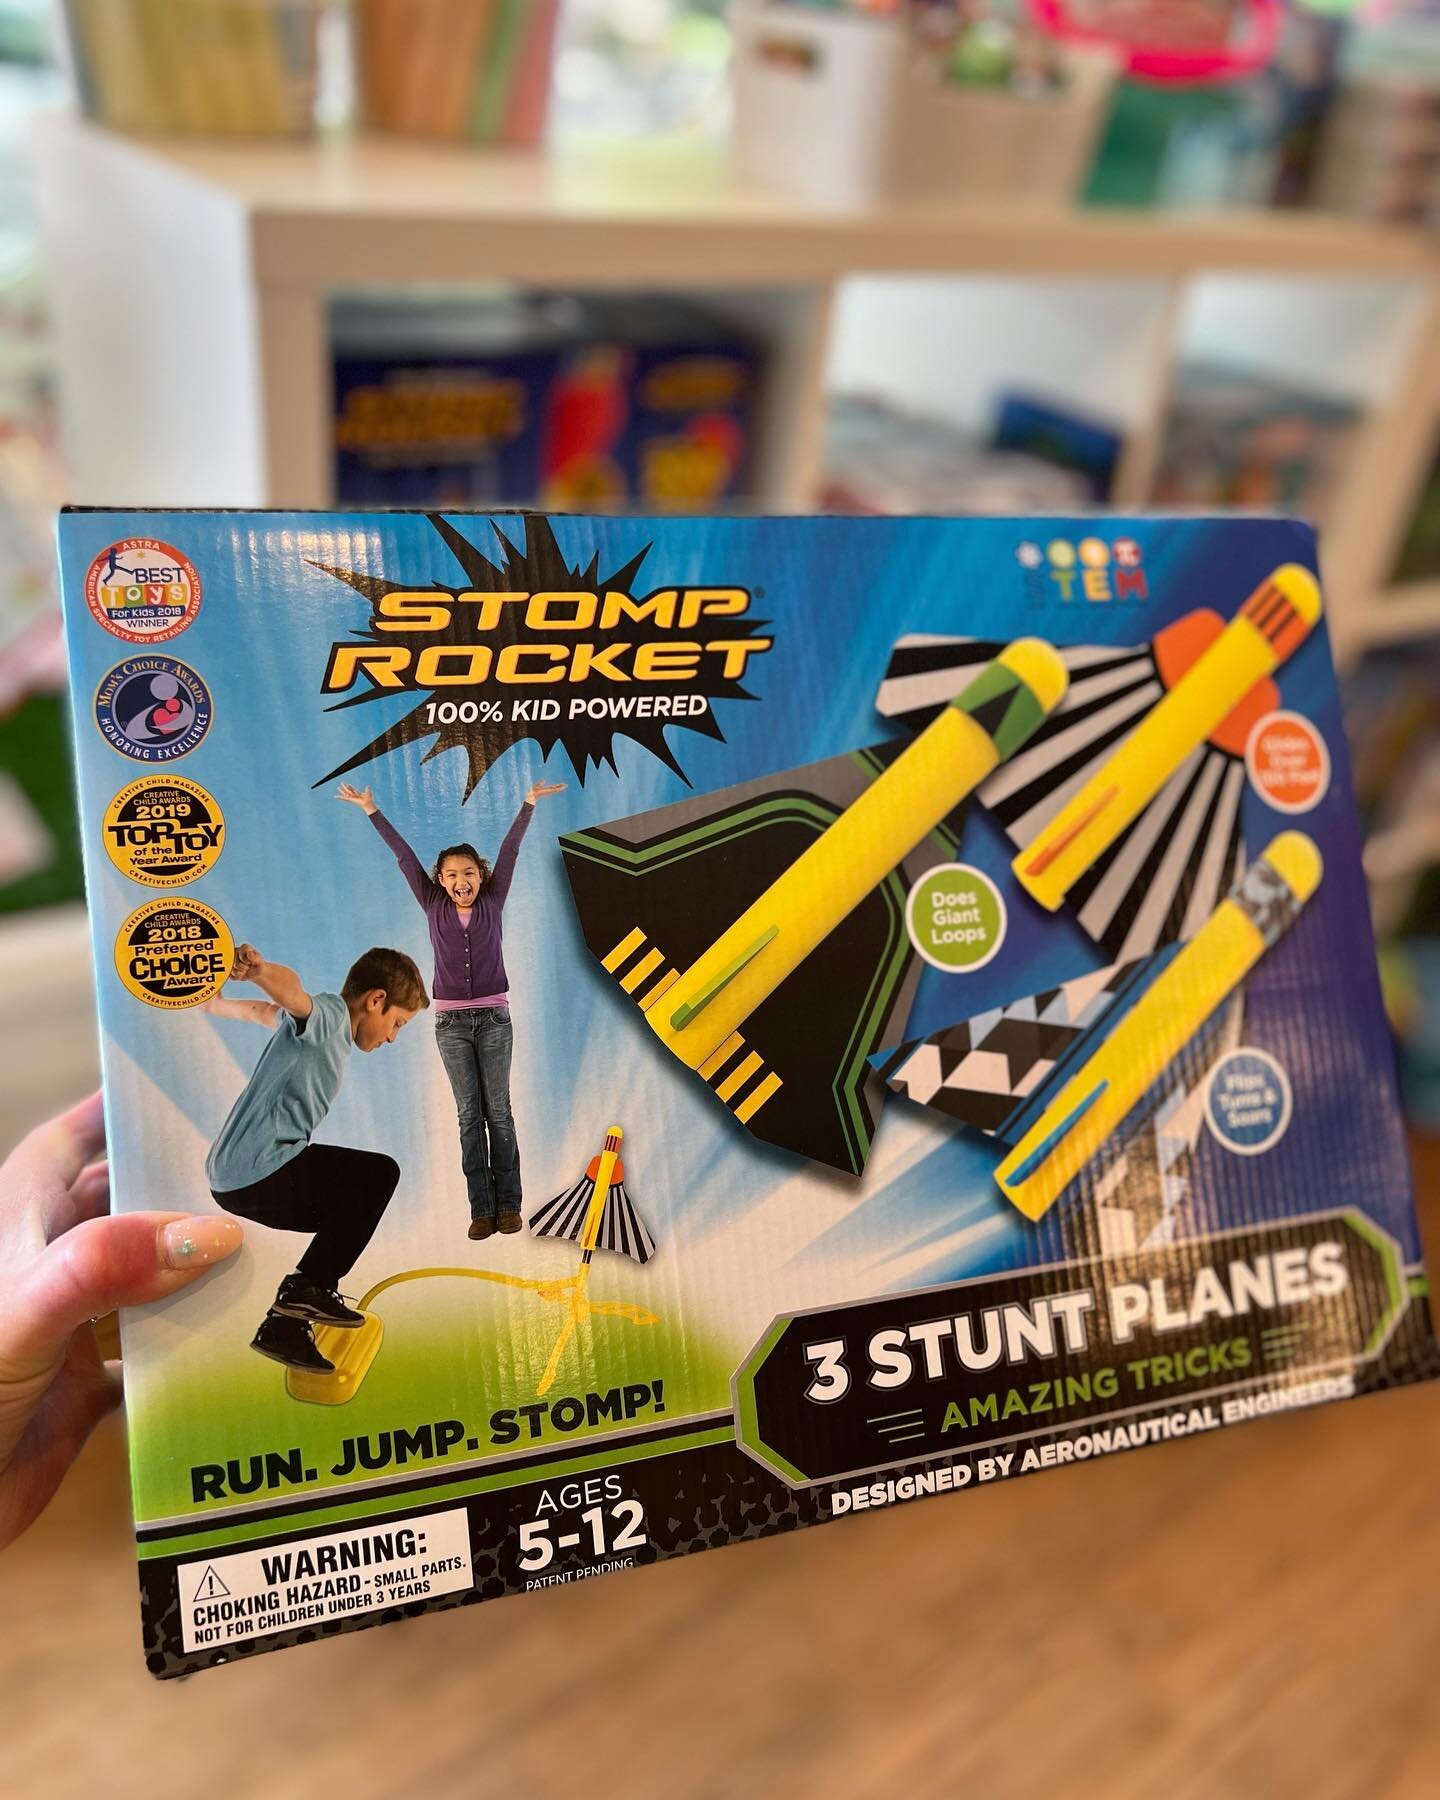 It&rsquo;s definitely @originalstomprocket weather 🚀

So many goodies to enjoy outdoors are in the shops! Perfect for patio, backyard, and taking to the park. Stop in and find a new outdoor play favorite!